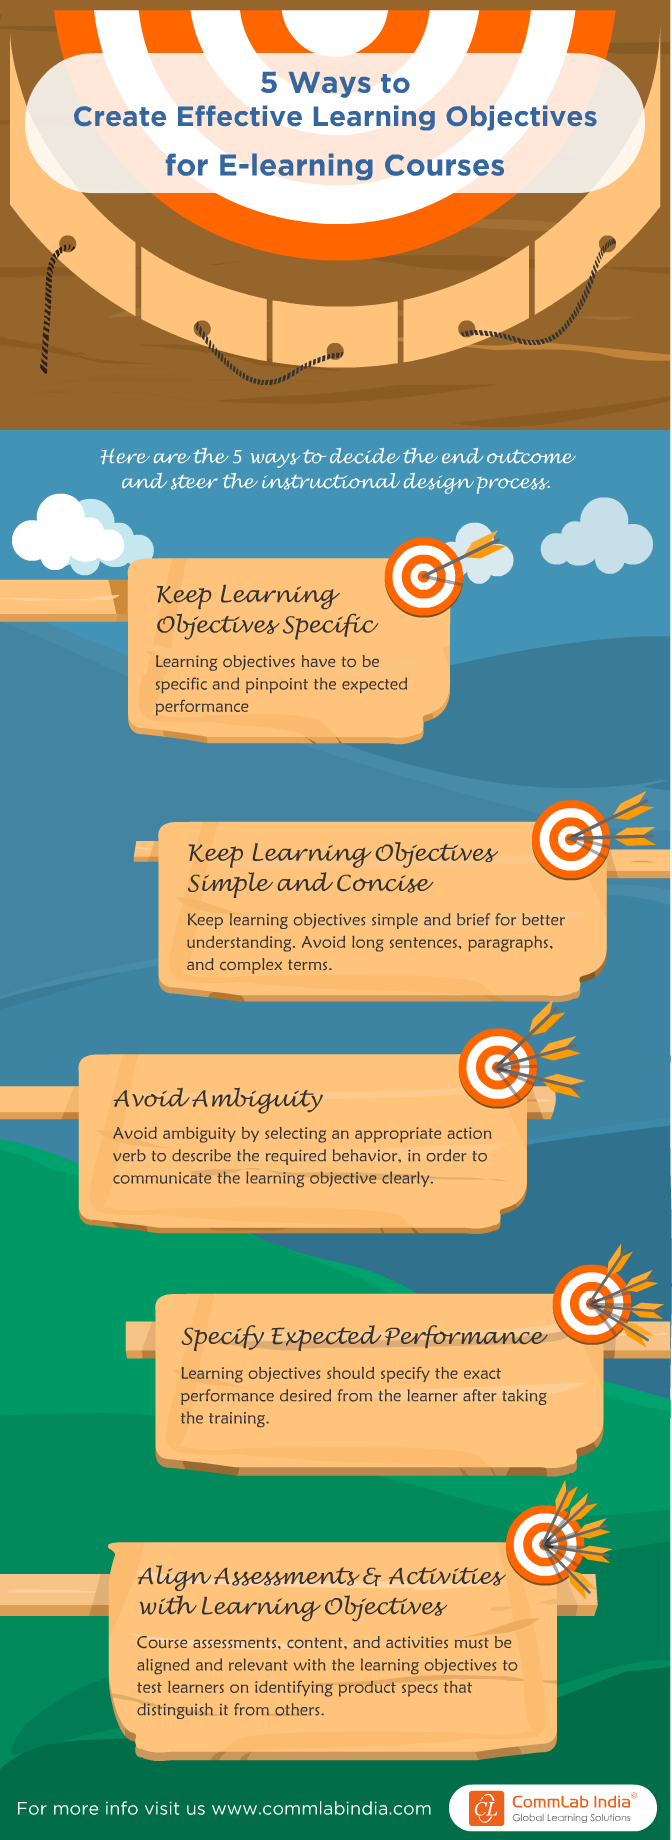 5 Ways to Create Effective Learning Objectives for E-learning Courses [Infographic]